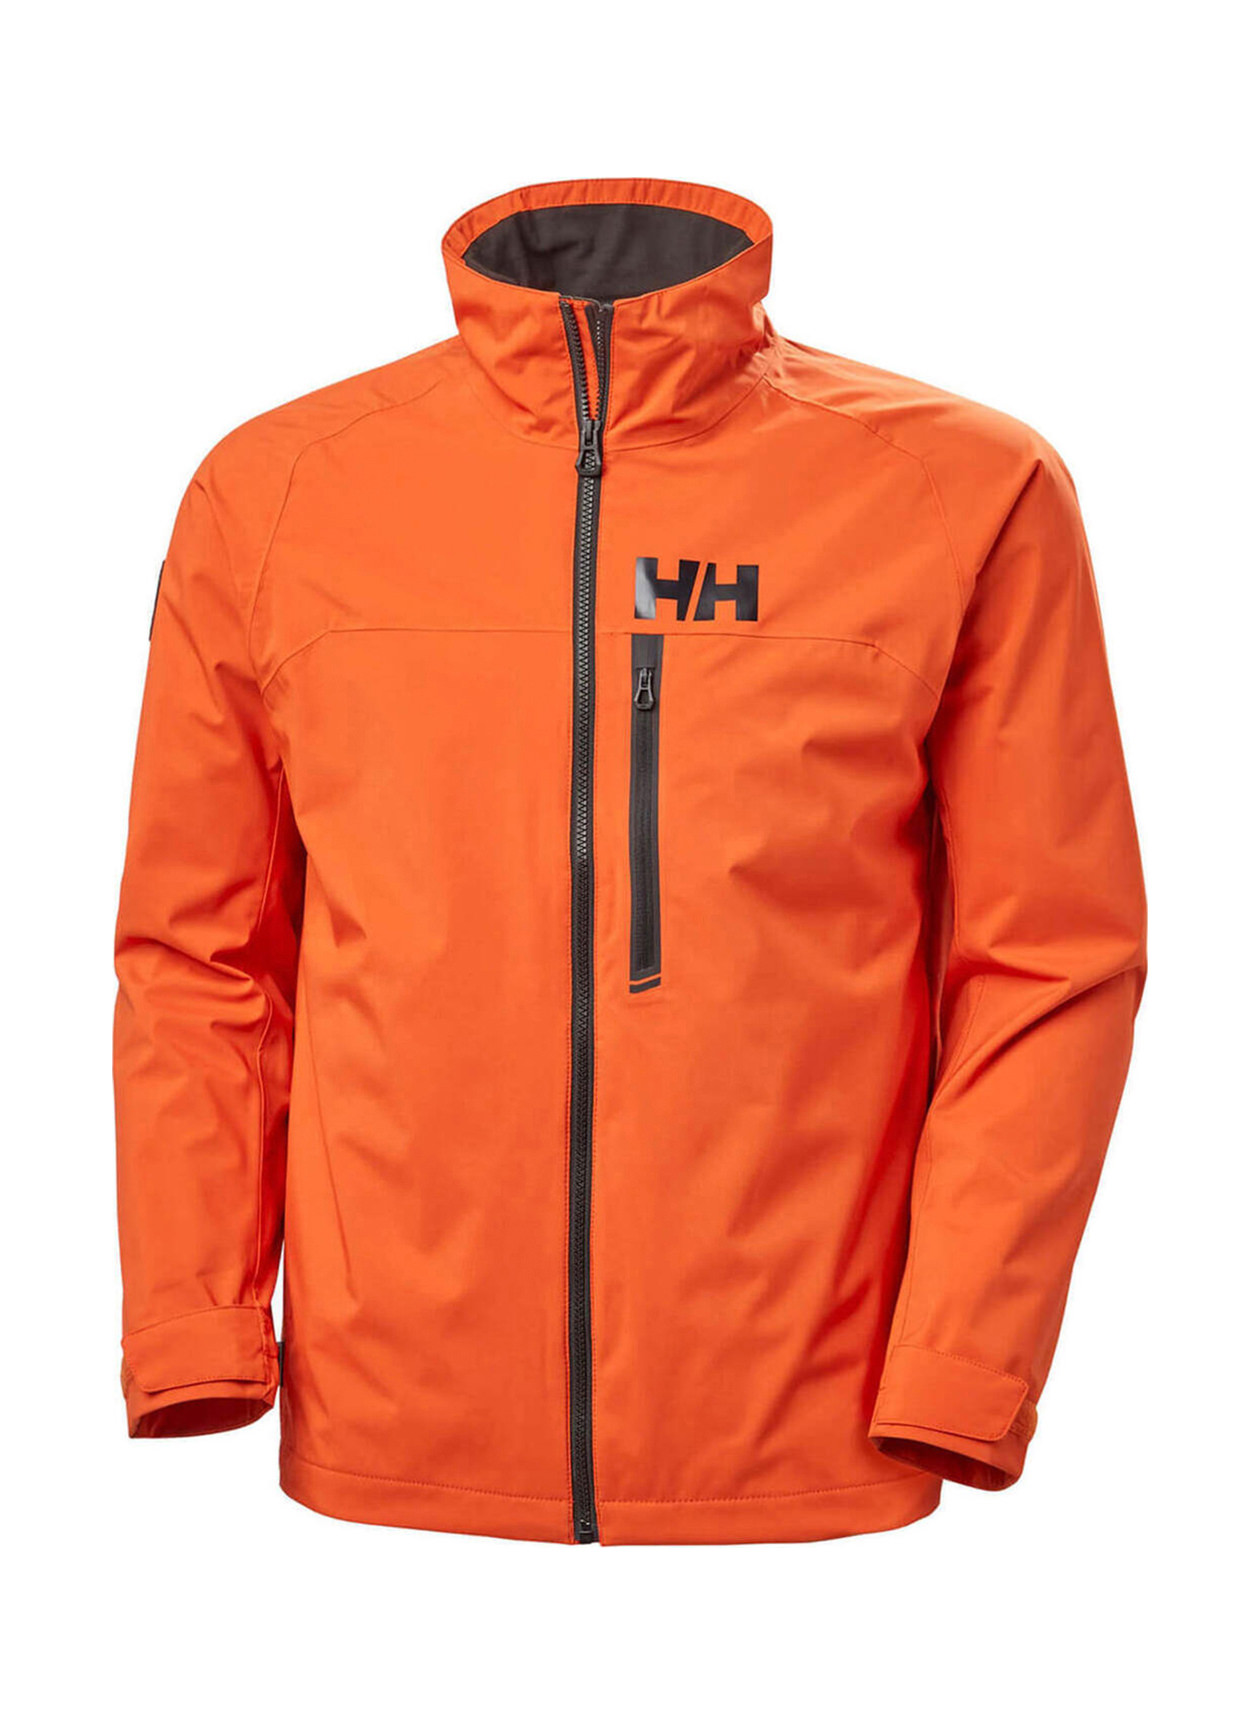 Full Sleeve Casual Jackets Just Sporty Jacket (Neon Orange) at Rs  1125/piece in Jalandhar